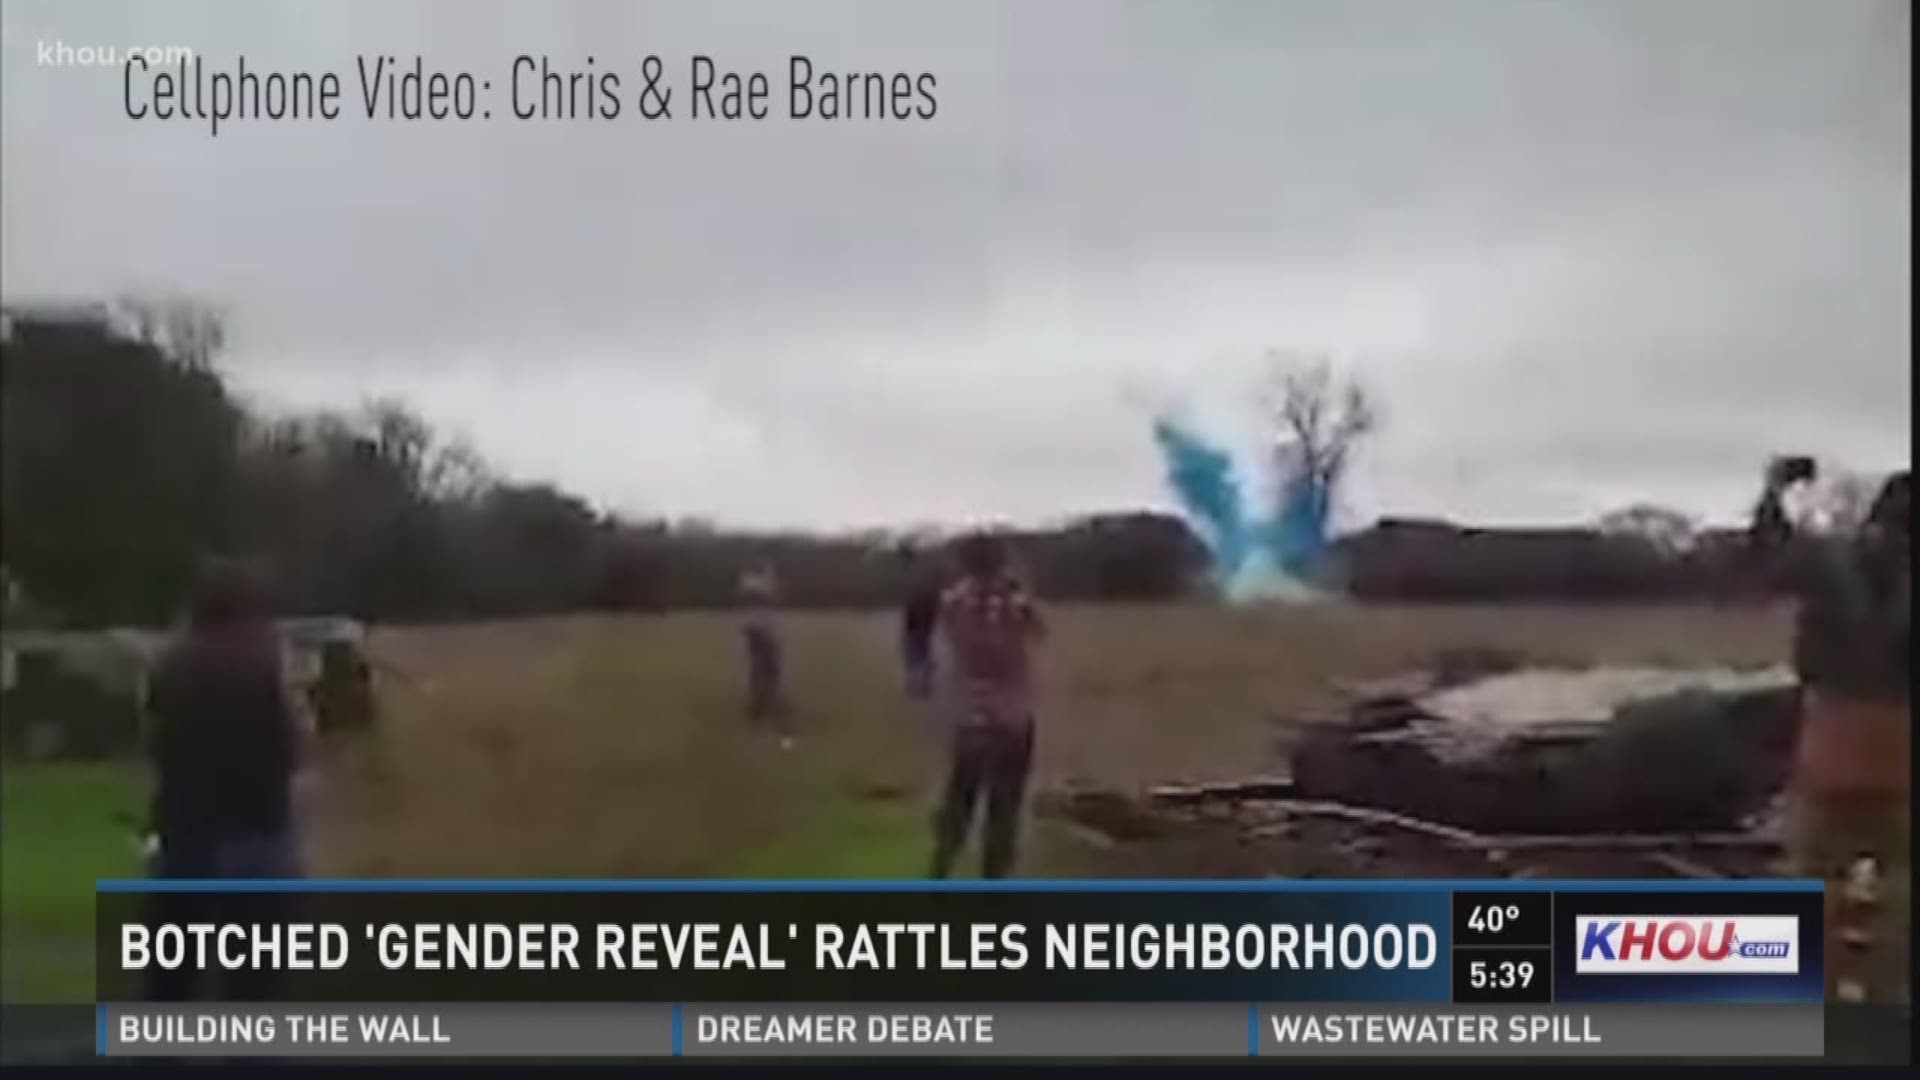 Just after noon Saturday, a loud BOOM shook houses and rattled nerves in Brazoria County. Turns out it was just a gender reveal explosion complete with blue smoke to announce the upcoming arrival of a baby boy.